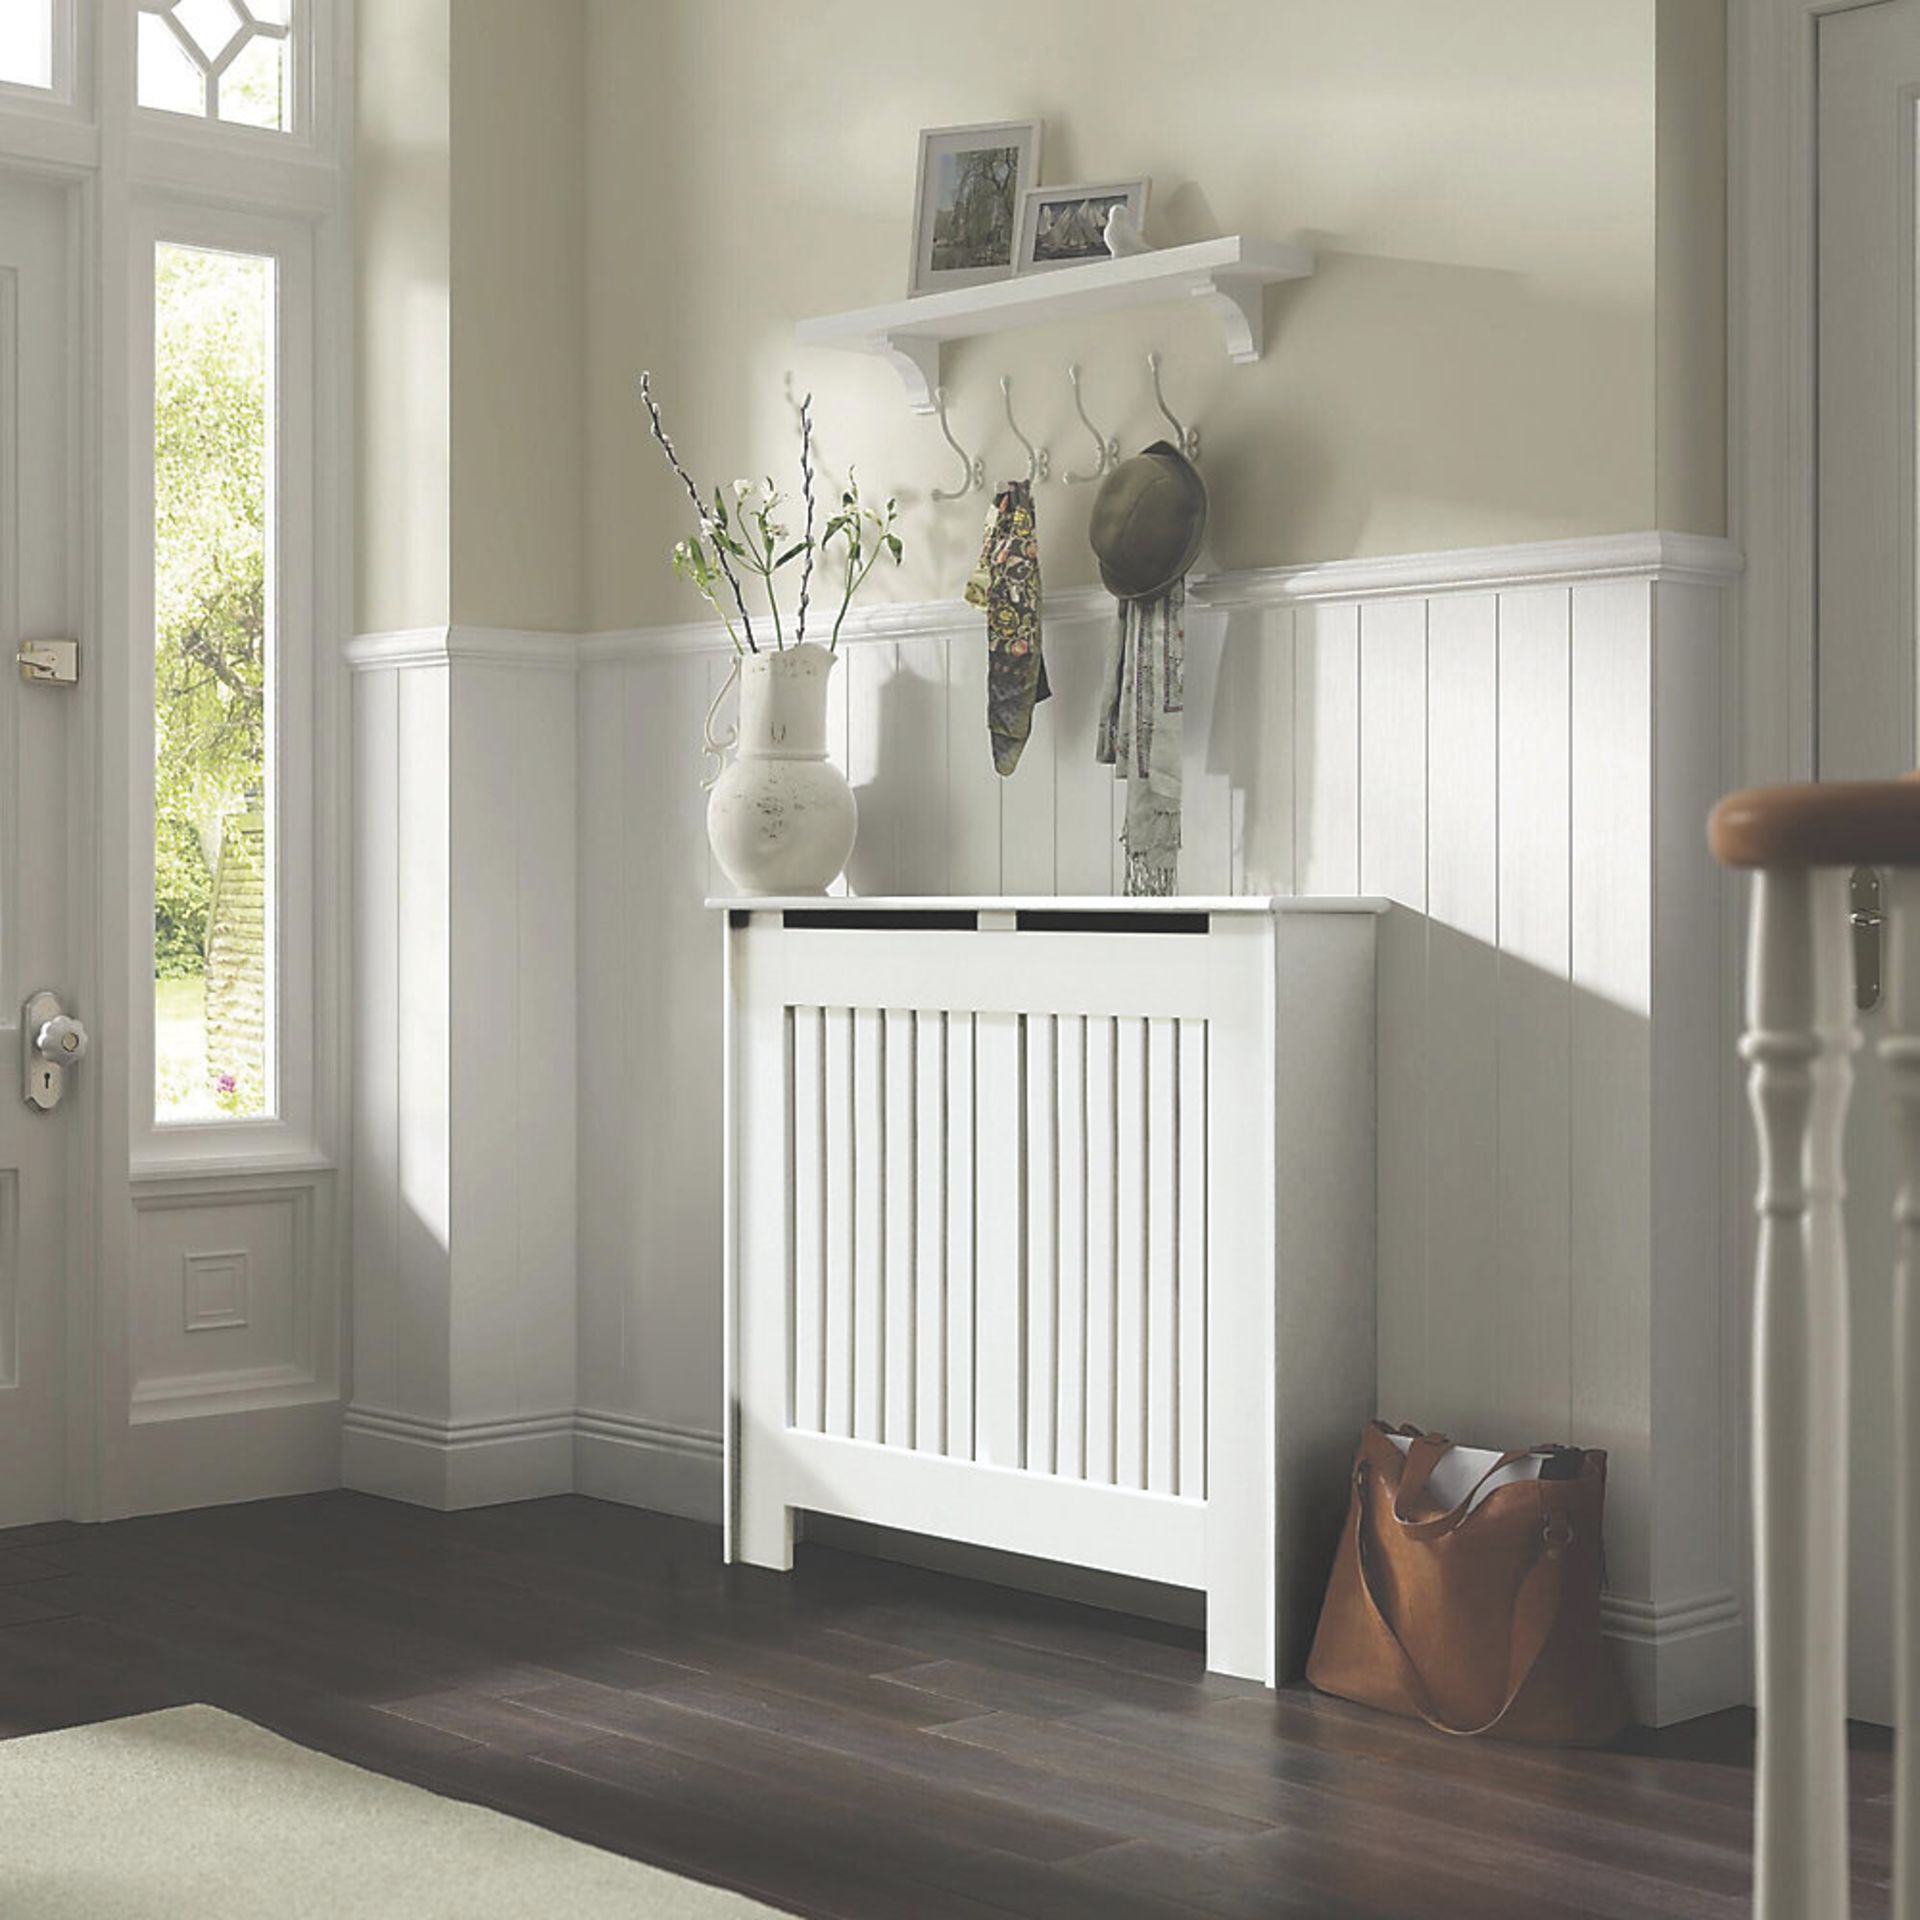 New (D137) Contemporary Kensington Radiator Cover Small White 1020 x 180 x 800mm . Ideal For Co...